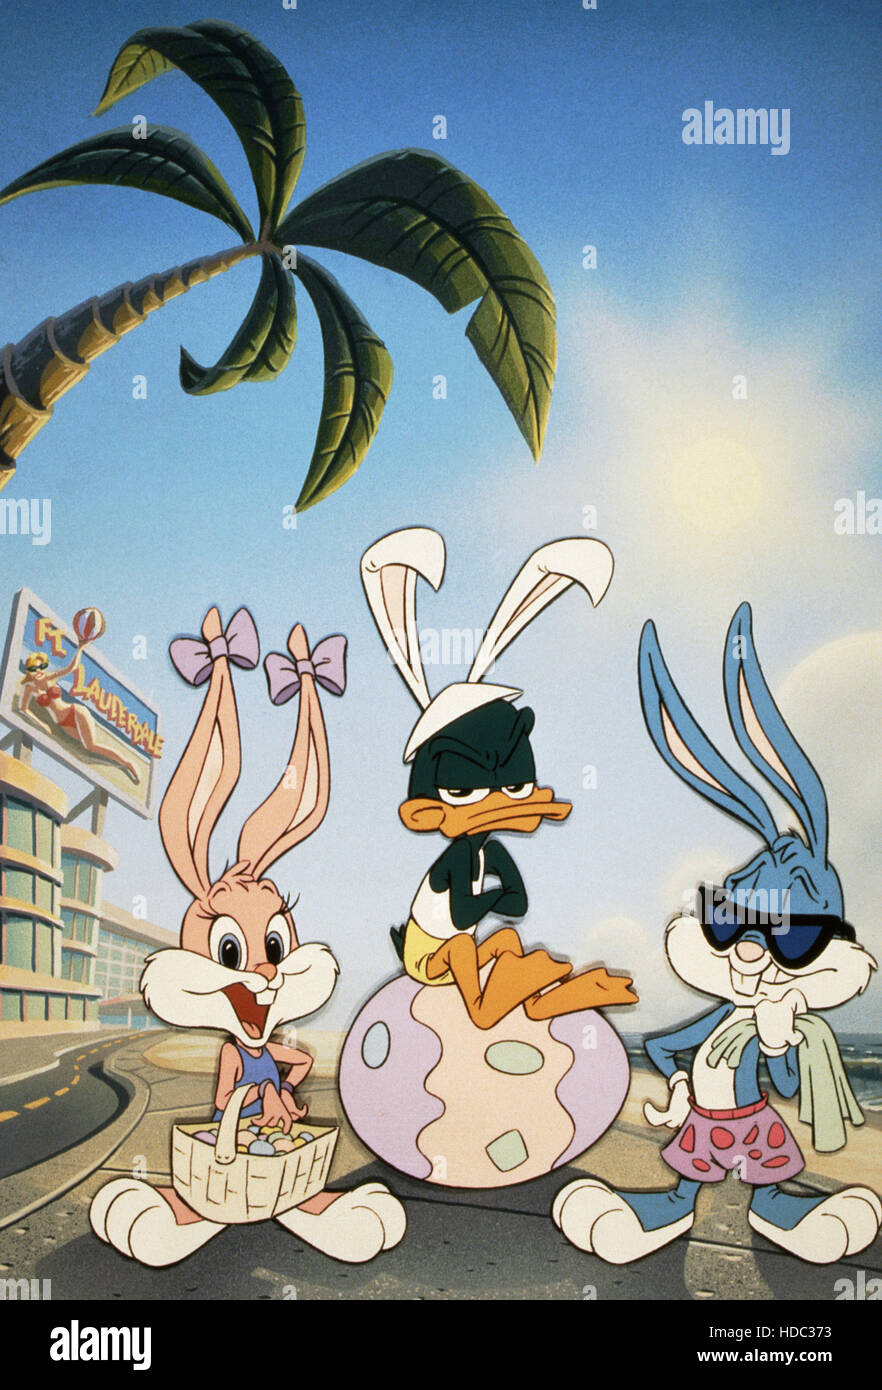 TINY TOON ADVENTURES, from left: Babs Bunny, Plucky Duck, Buster Bunny,  1990-1995, © Warner Brothers/courtesy Everett Collection Stock Photo - Alamy